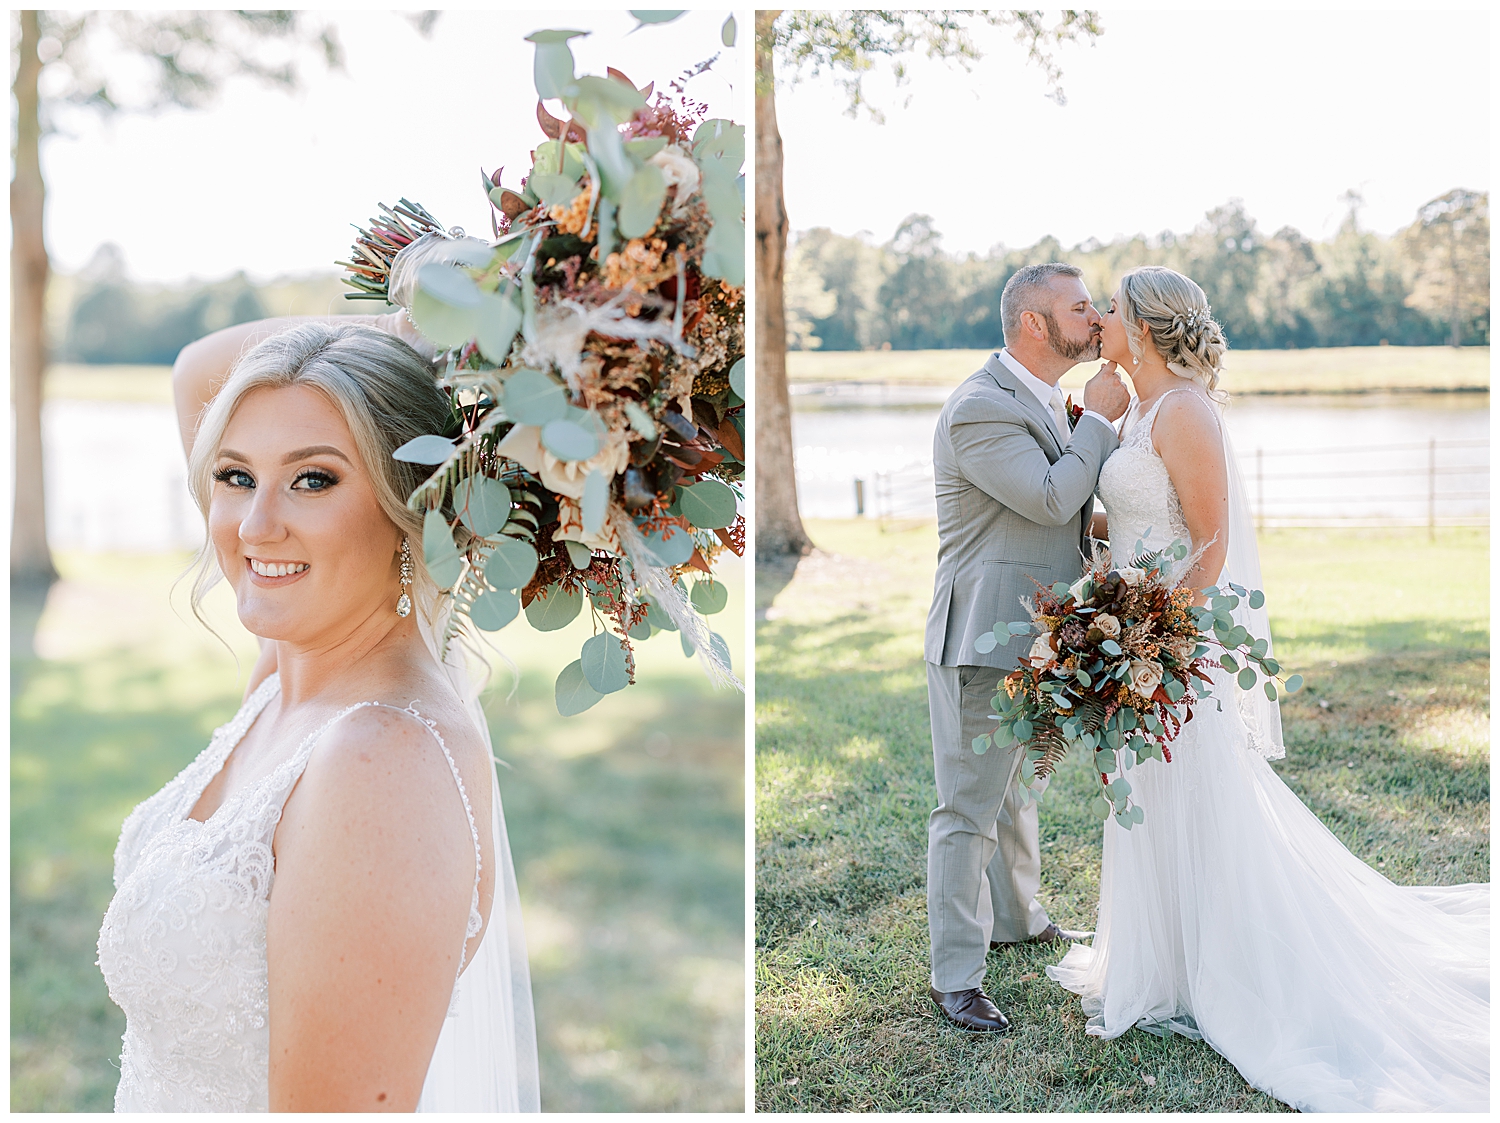 The bride and groom kiss in front of a lake at Three Lakes Manor in Poplarville.